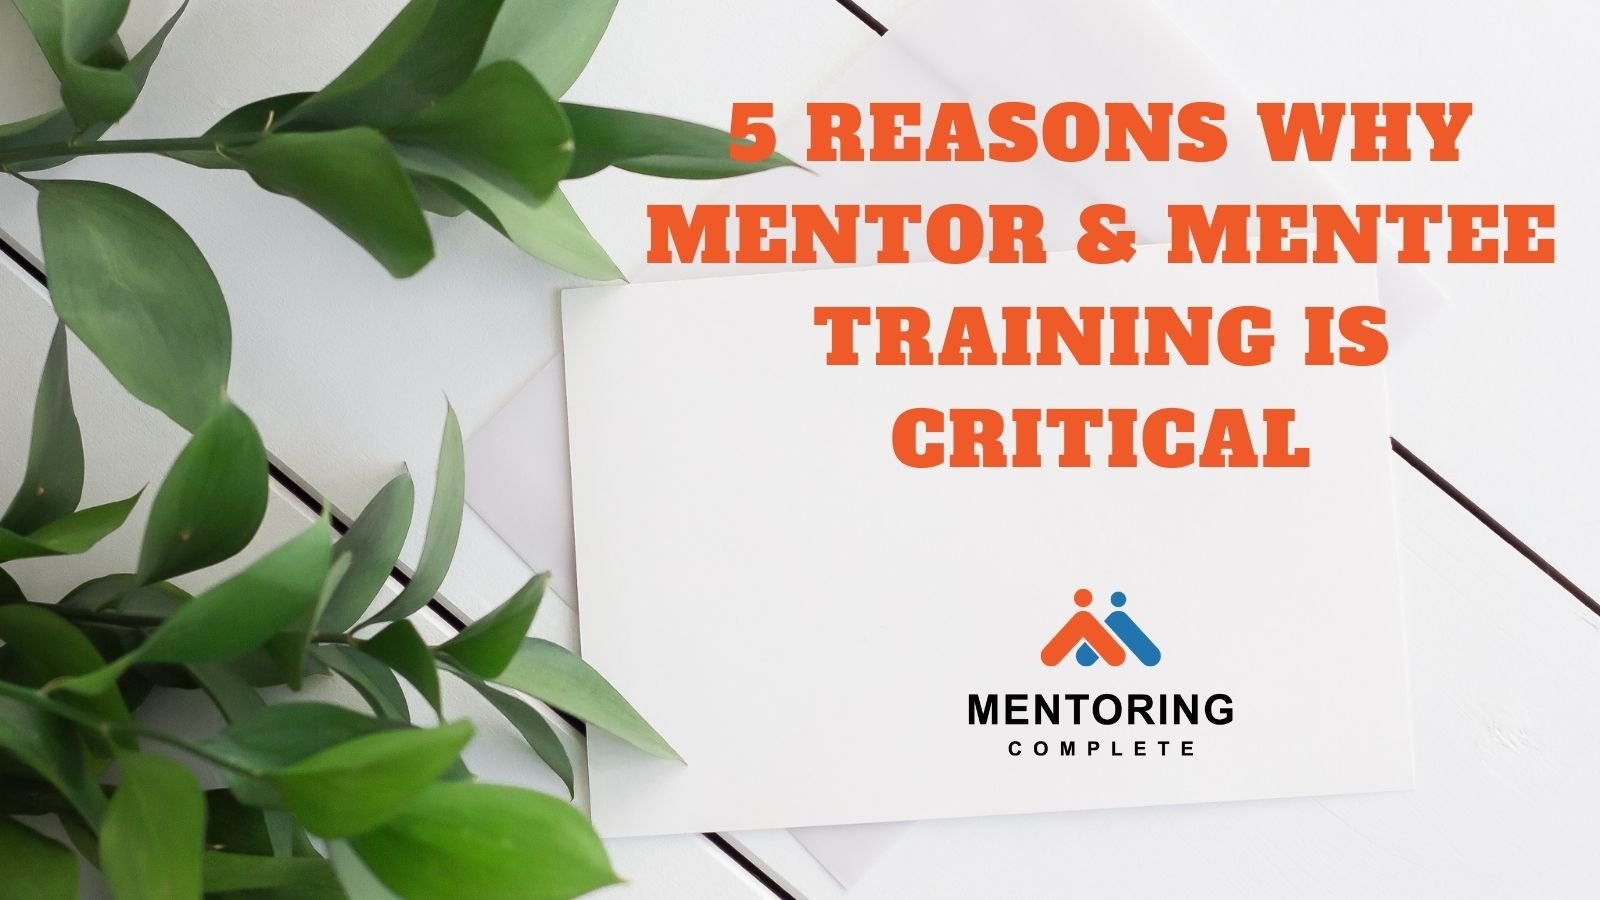 5 Reasons Why mentor & mentee training is critical (1)